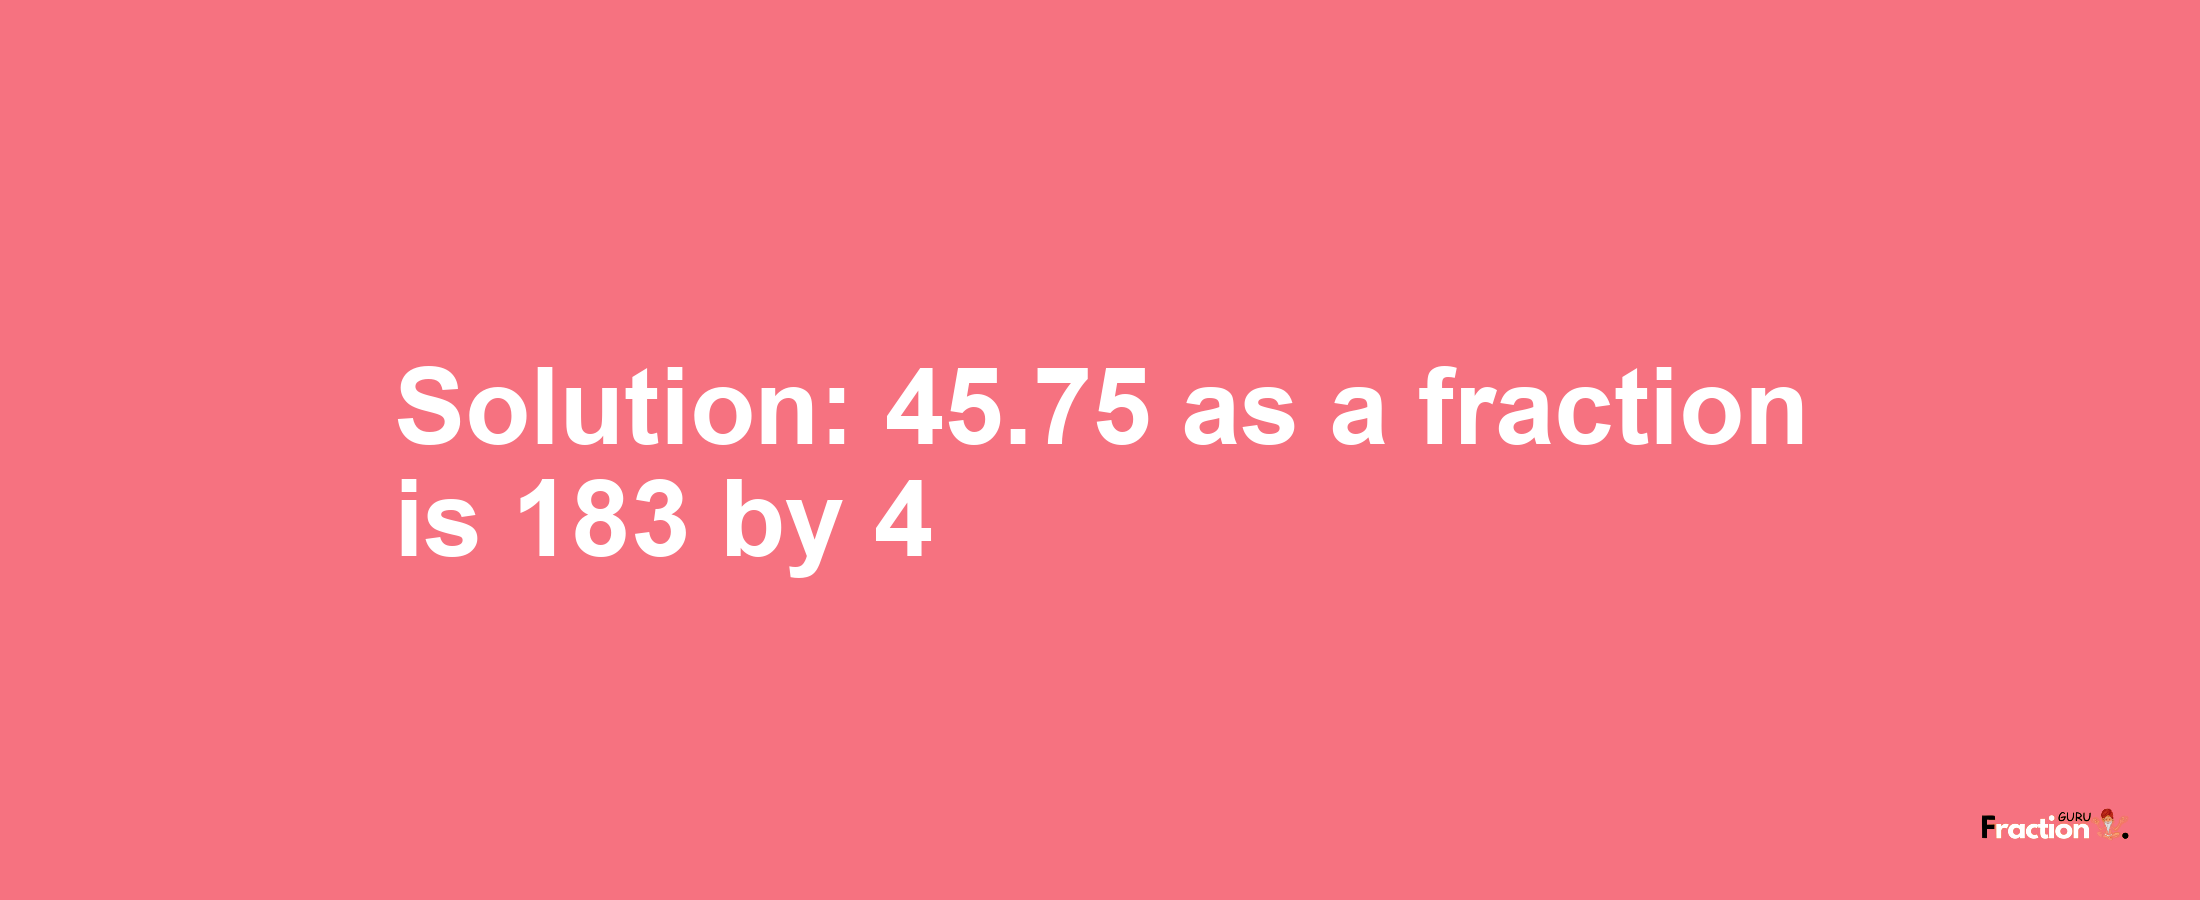 Solution:45.75 as a fraction is 183/4